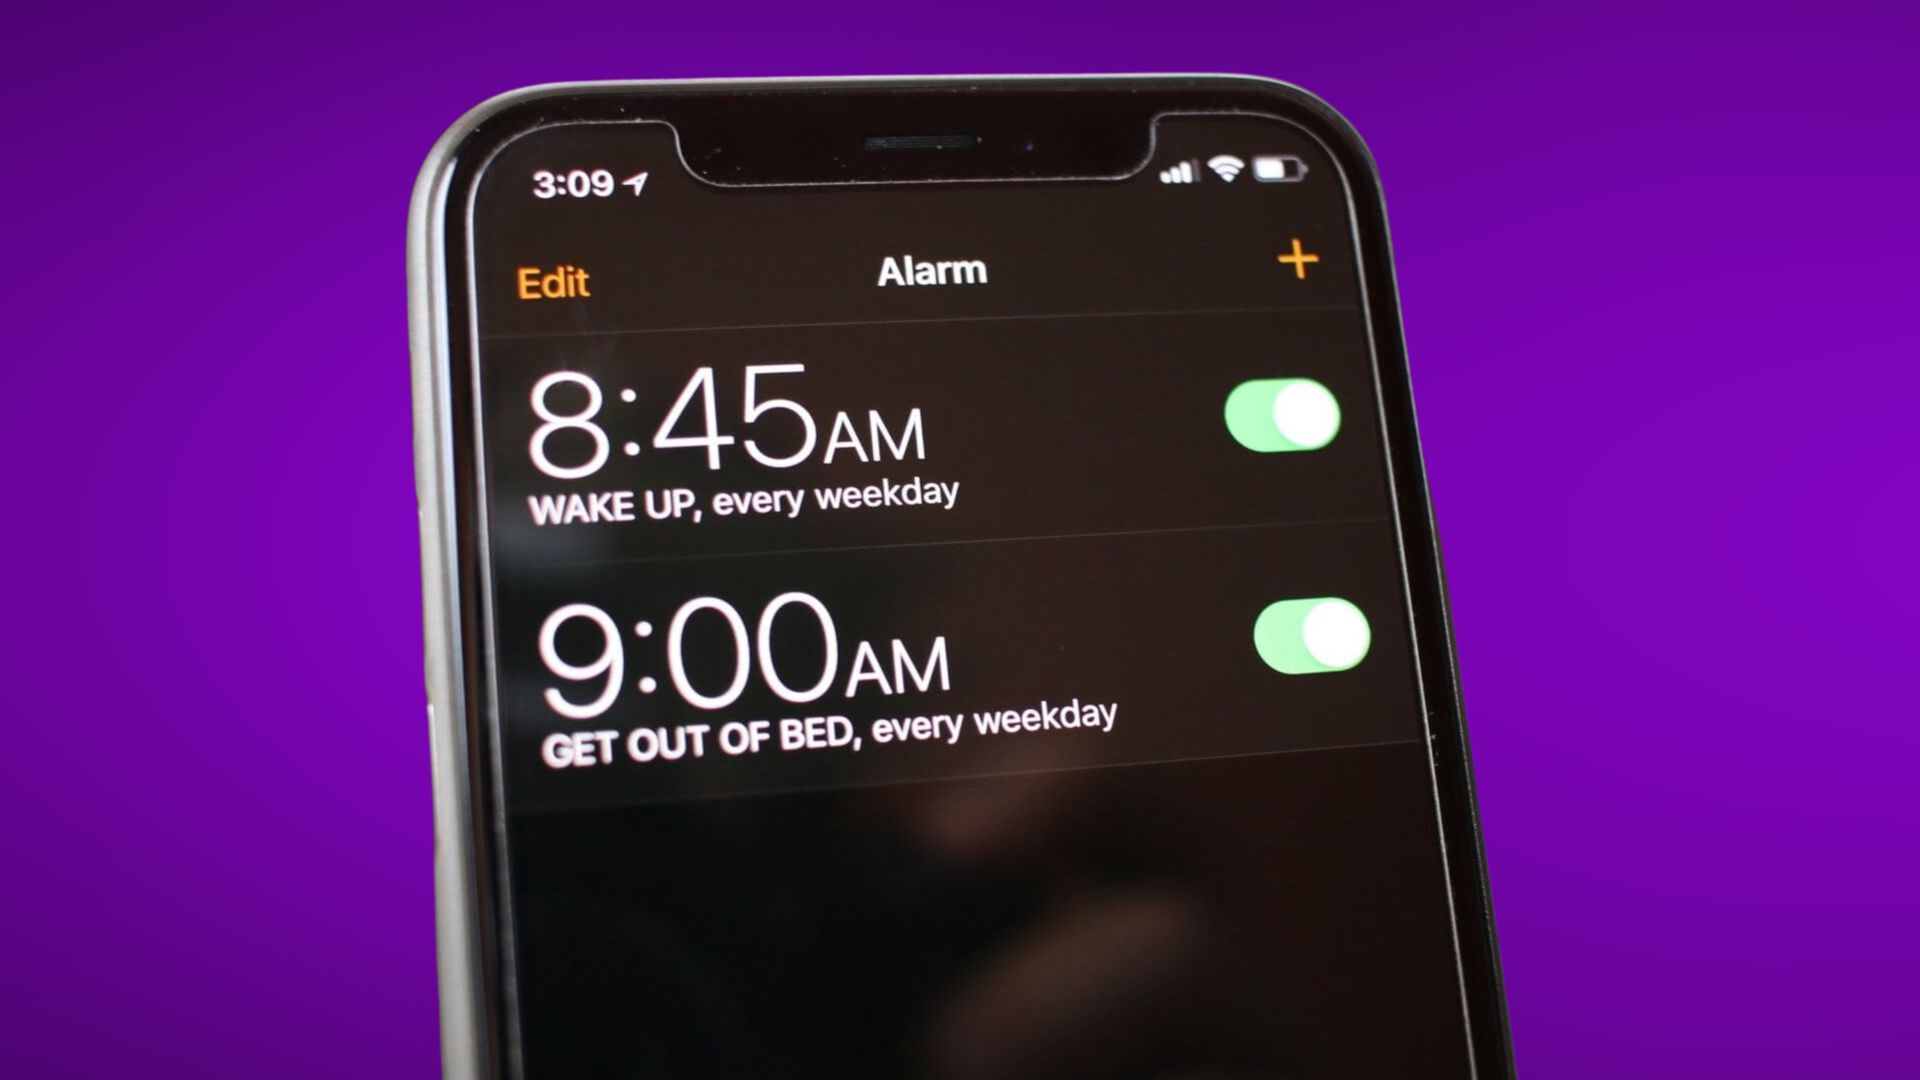 ow does Your Alarm Stay On After an Update